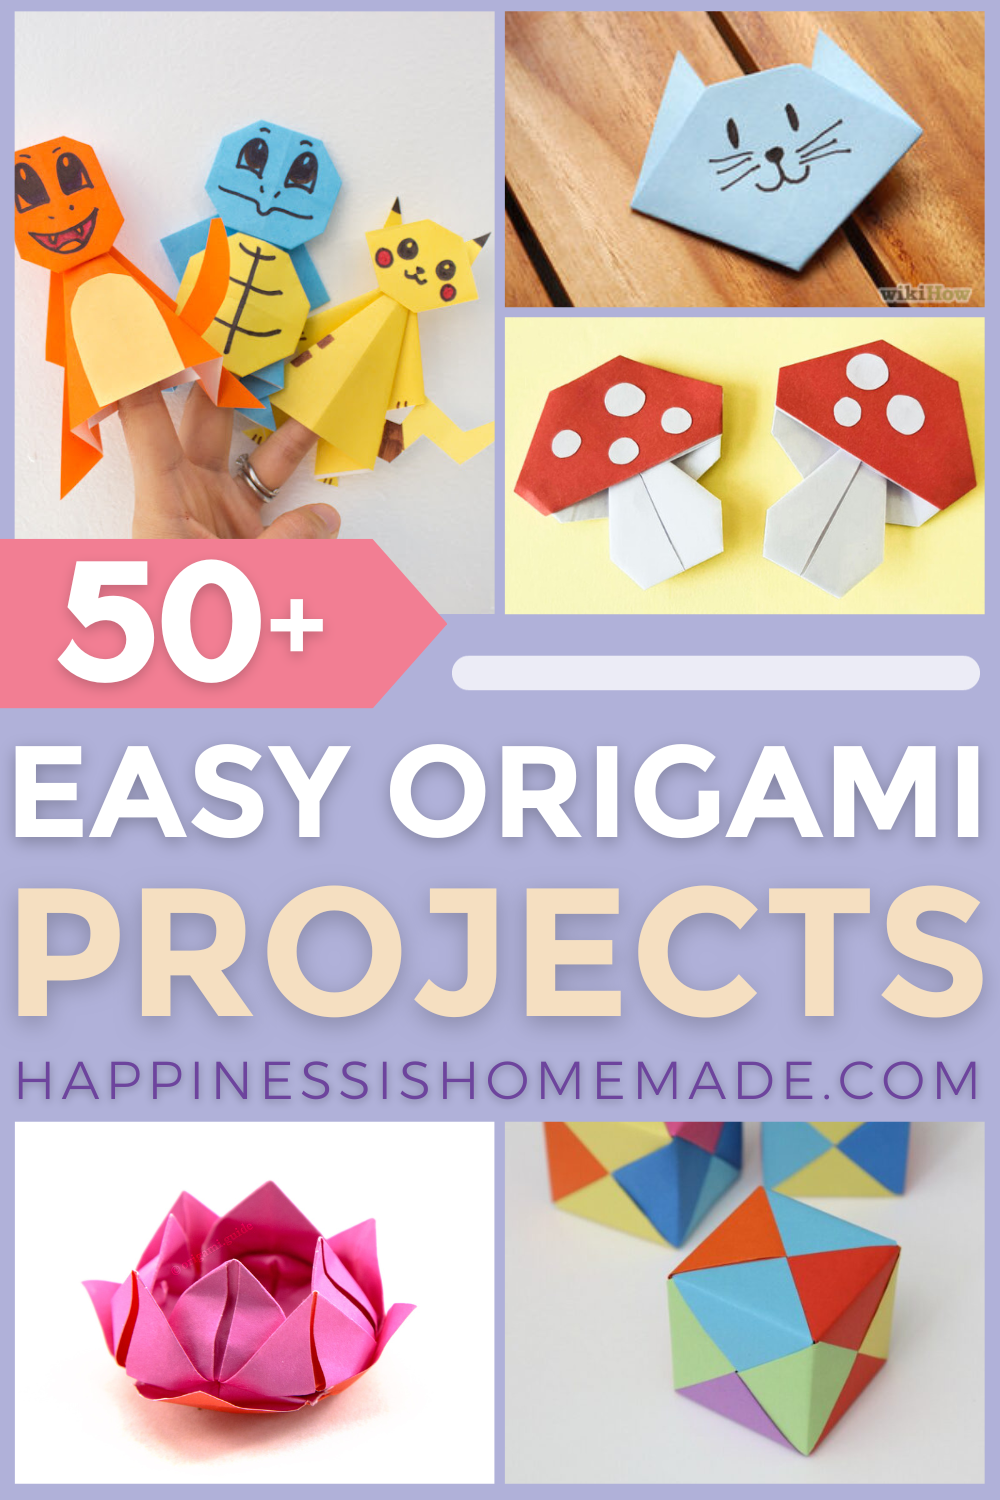 50+ easy origami projects pin graphic